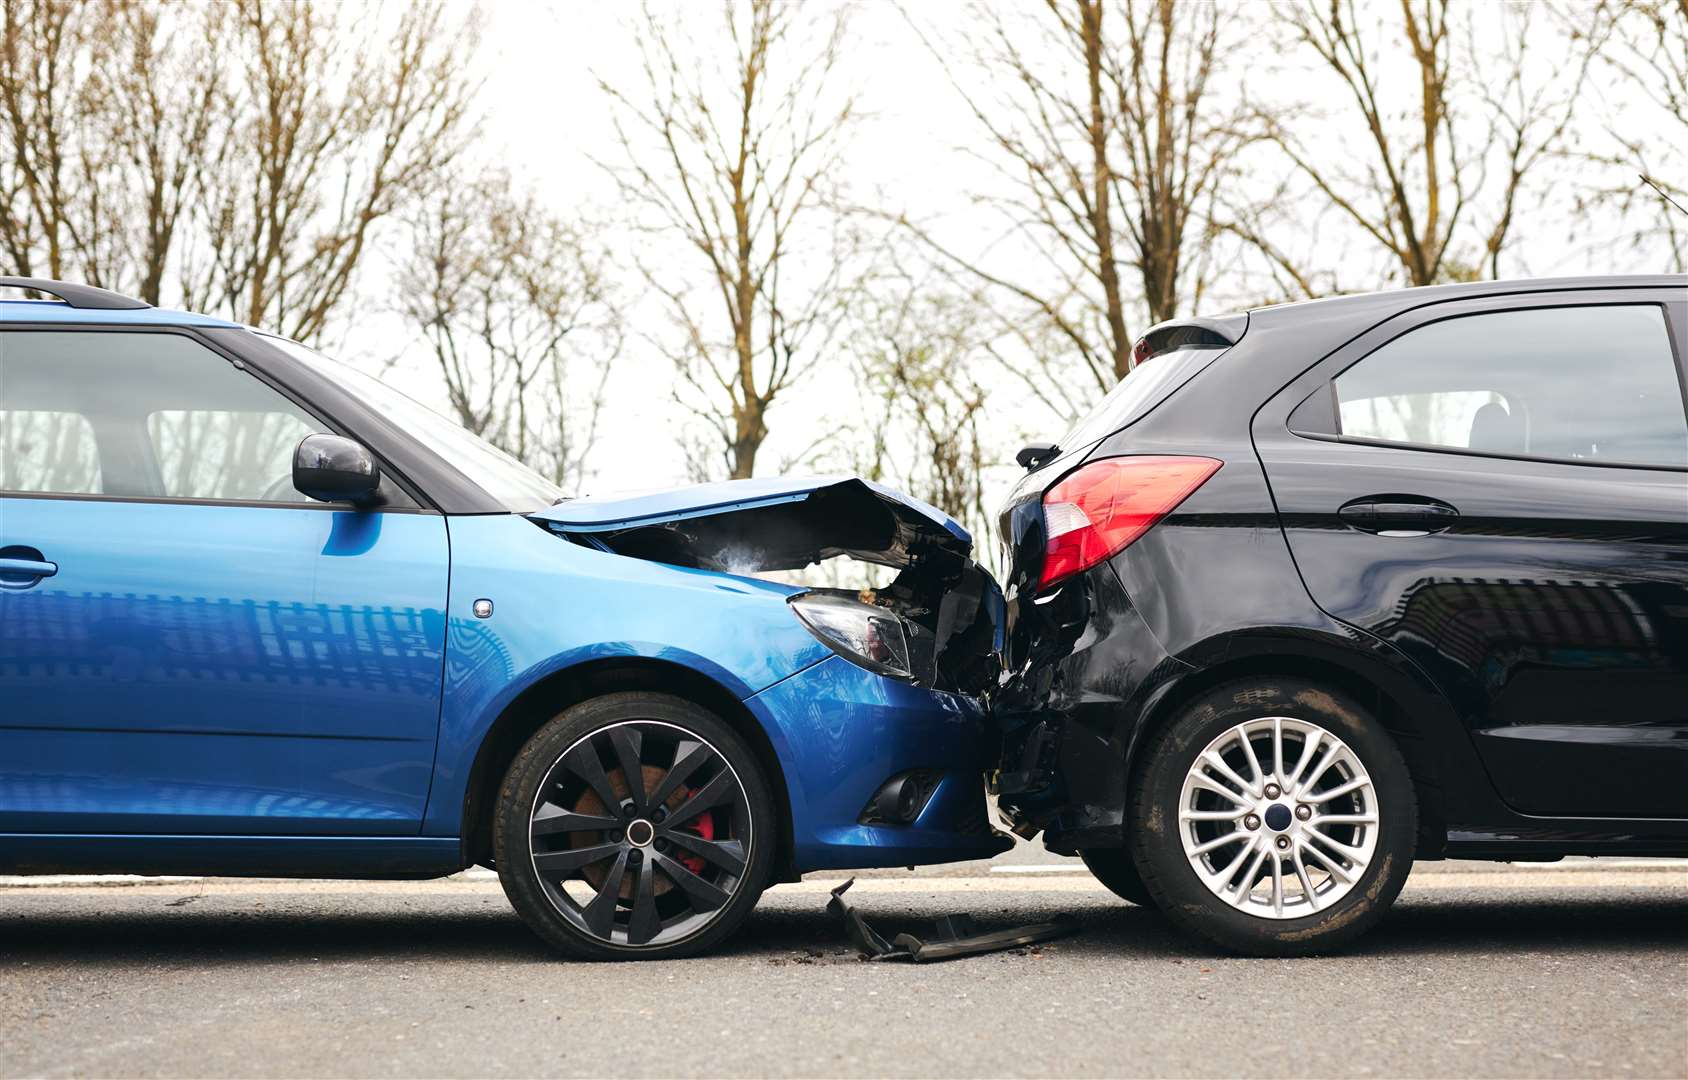 RAC Insurance has released data on the number of uninsured drivers caught in 2020